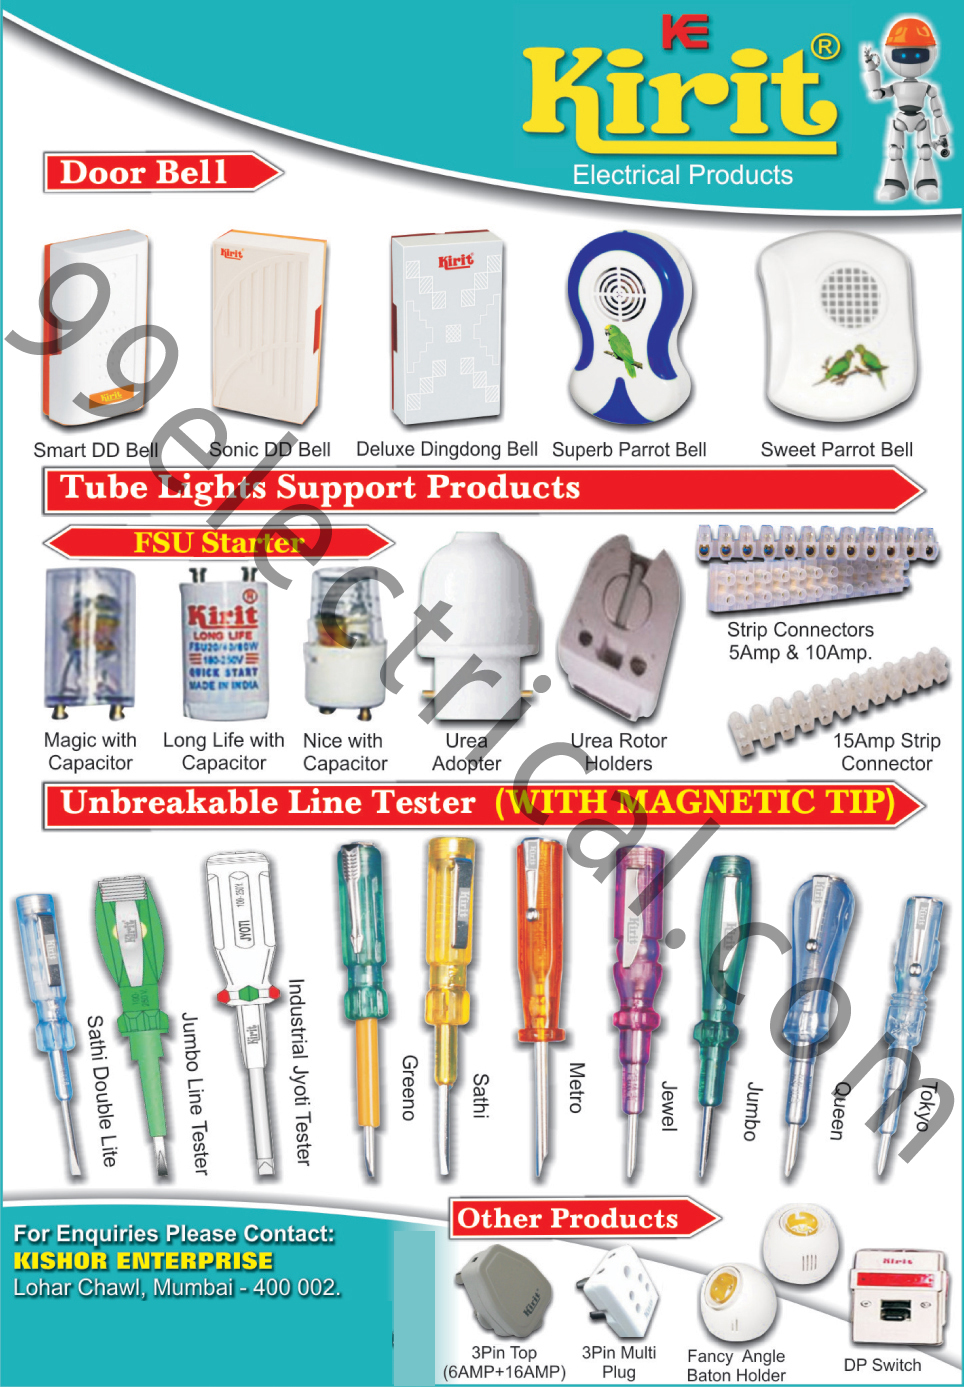 Electrical Accessories, Electrical Equipment, Door Bell, Electrical Products, Unbreakable Line Tester, Tube Light Support Products, Line Tester, Tube Light Support Products, Capacitor, Adopter, Holder, Connector, Strip Connectors, Tester, Plug, DP Switch, Multi Plug, Line Tester, 3 Pin Multi Plugs, Three Pin Multi Plugs, Fancy Angle Adapters, Angle Adapters, Urea Adapters, Electrical Products